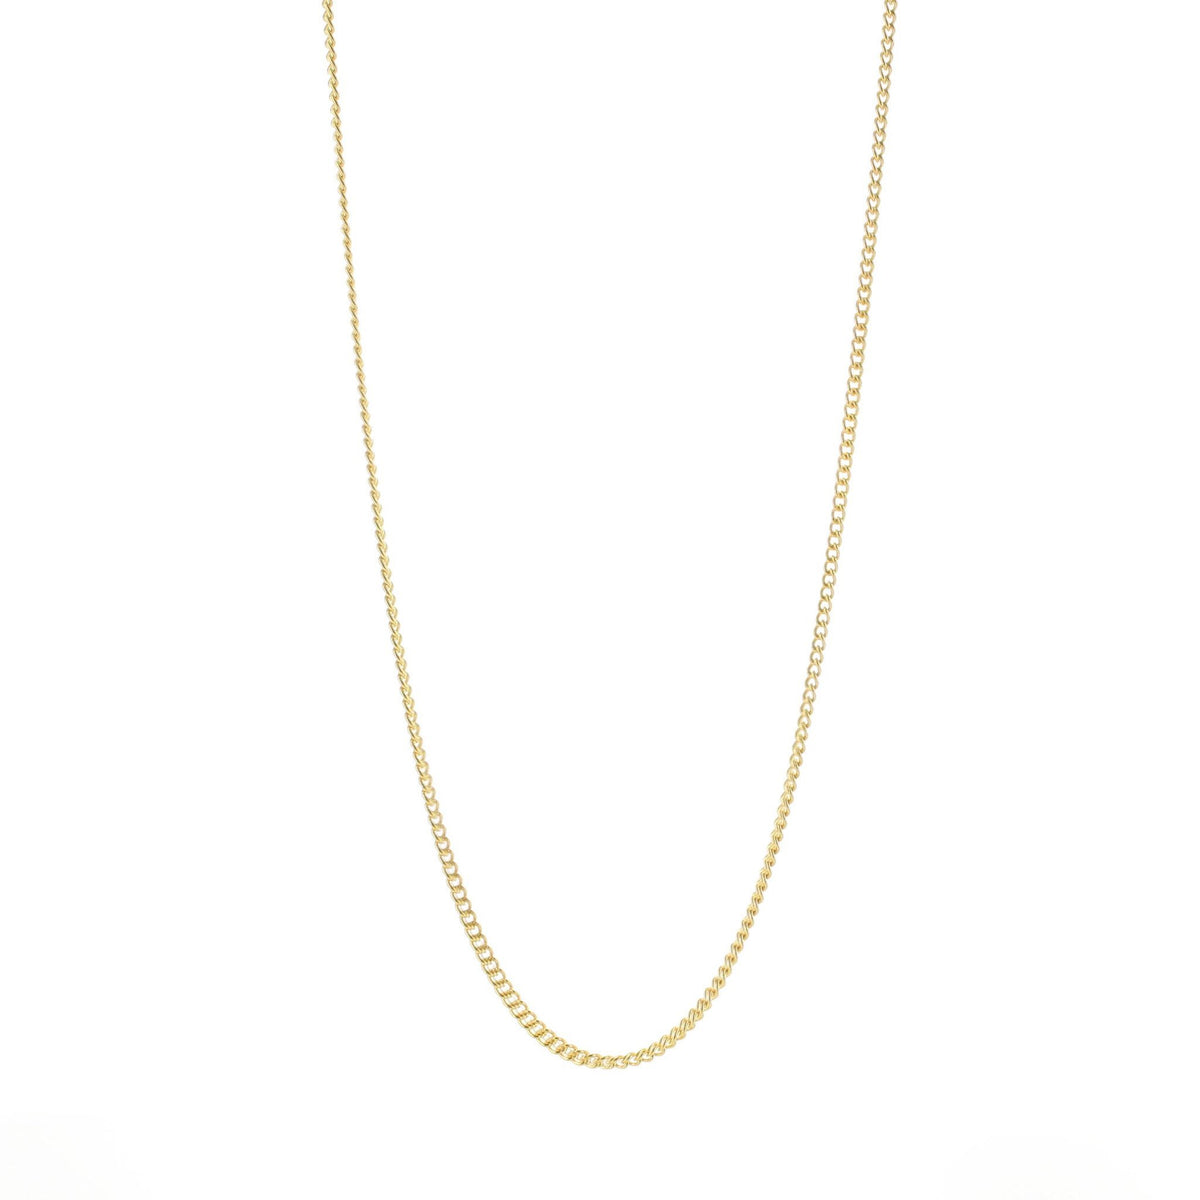 CHARMING 14-18&quot; NECKLACE - SOLID 14K GOLD - SO PRETTY CARA COTTER